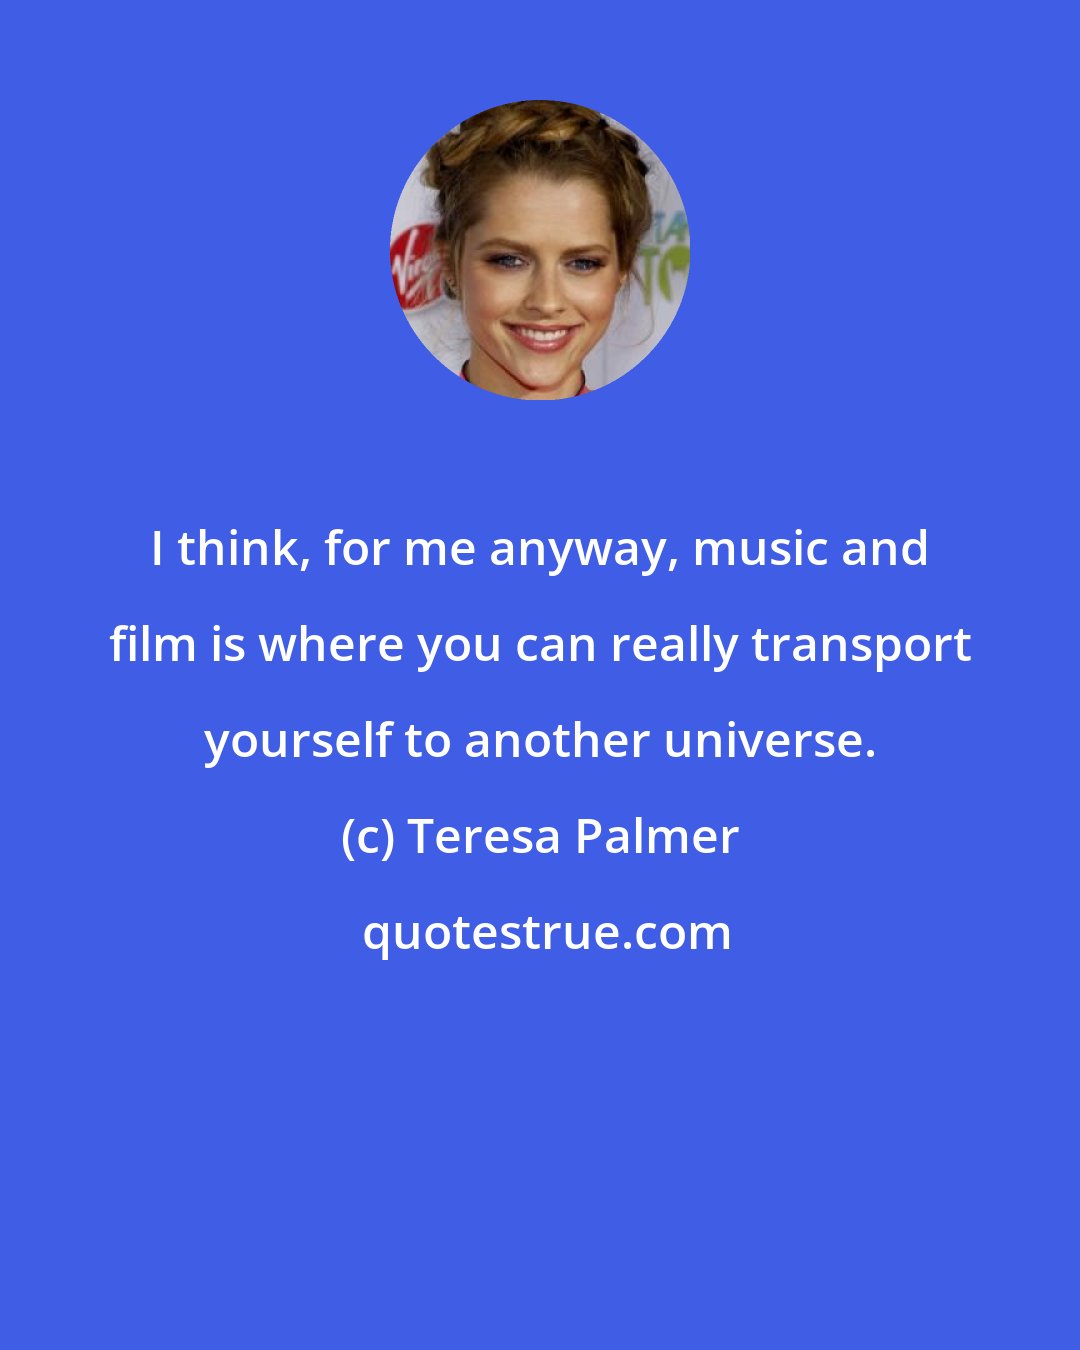 Teresa Palmer: I think, for me anyway, music and film is where you can really transport yourself to another universe.